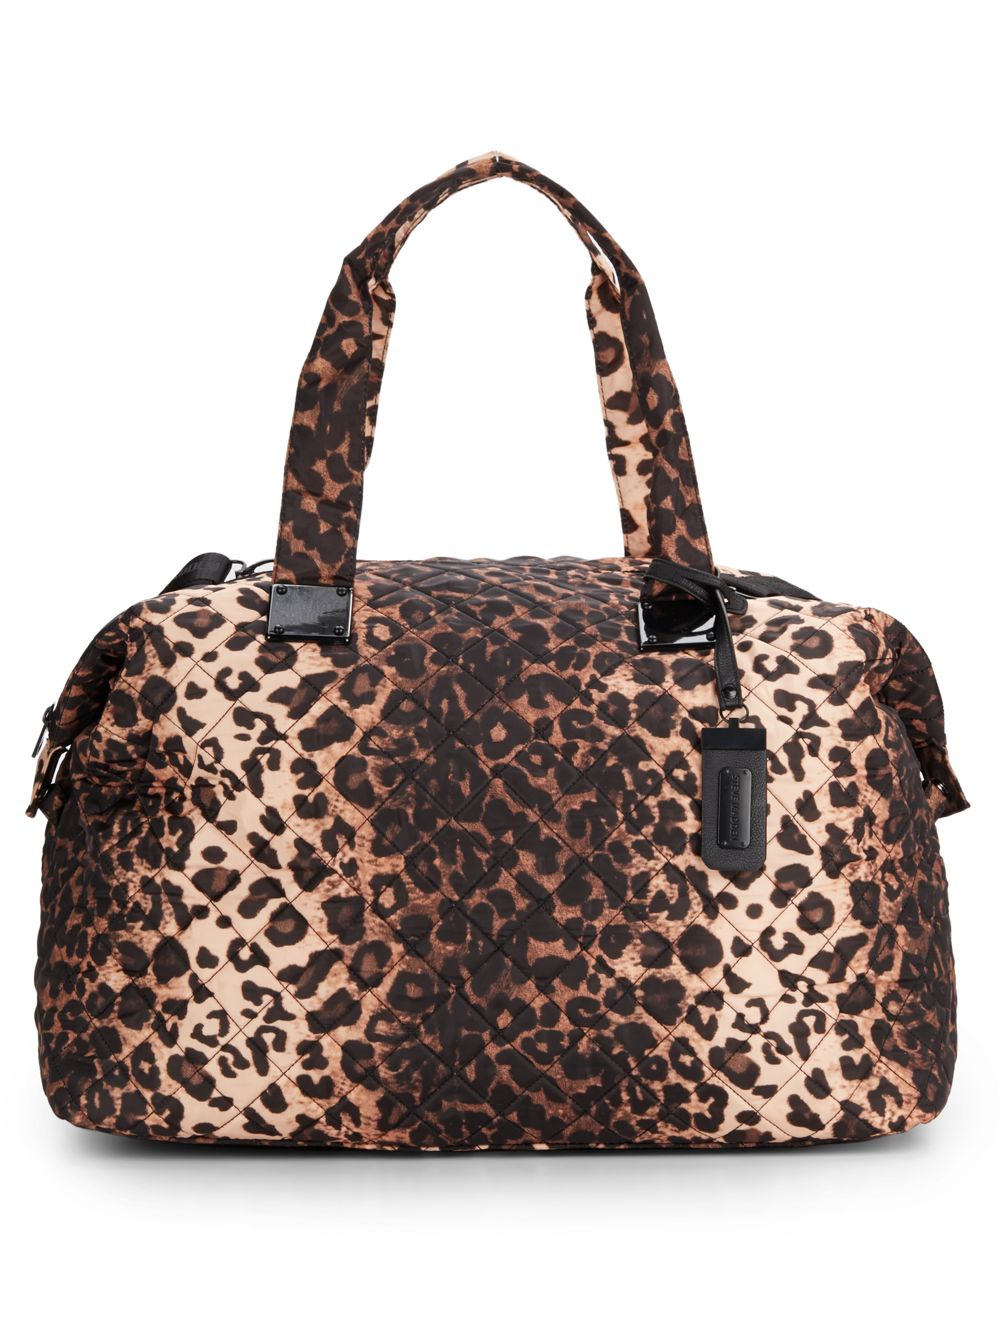 Steve madden Quilted Leopard-print Duffle Bag in Multicolor | Lyst